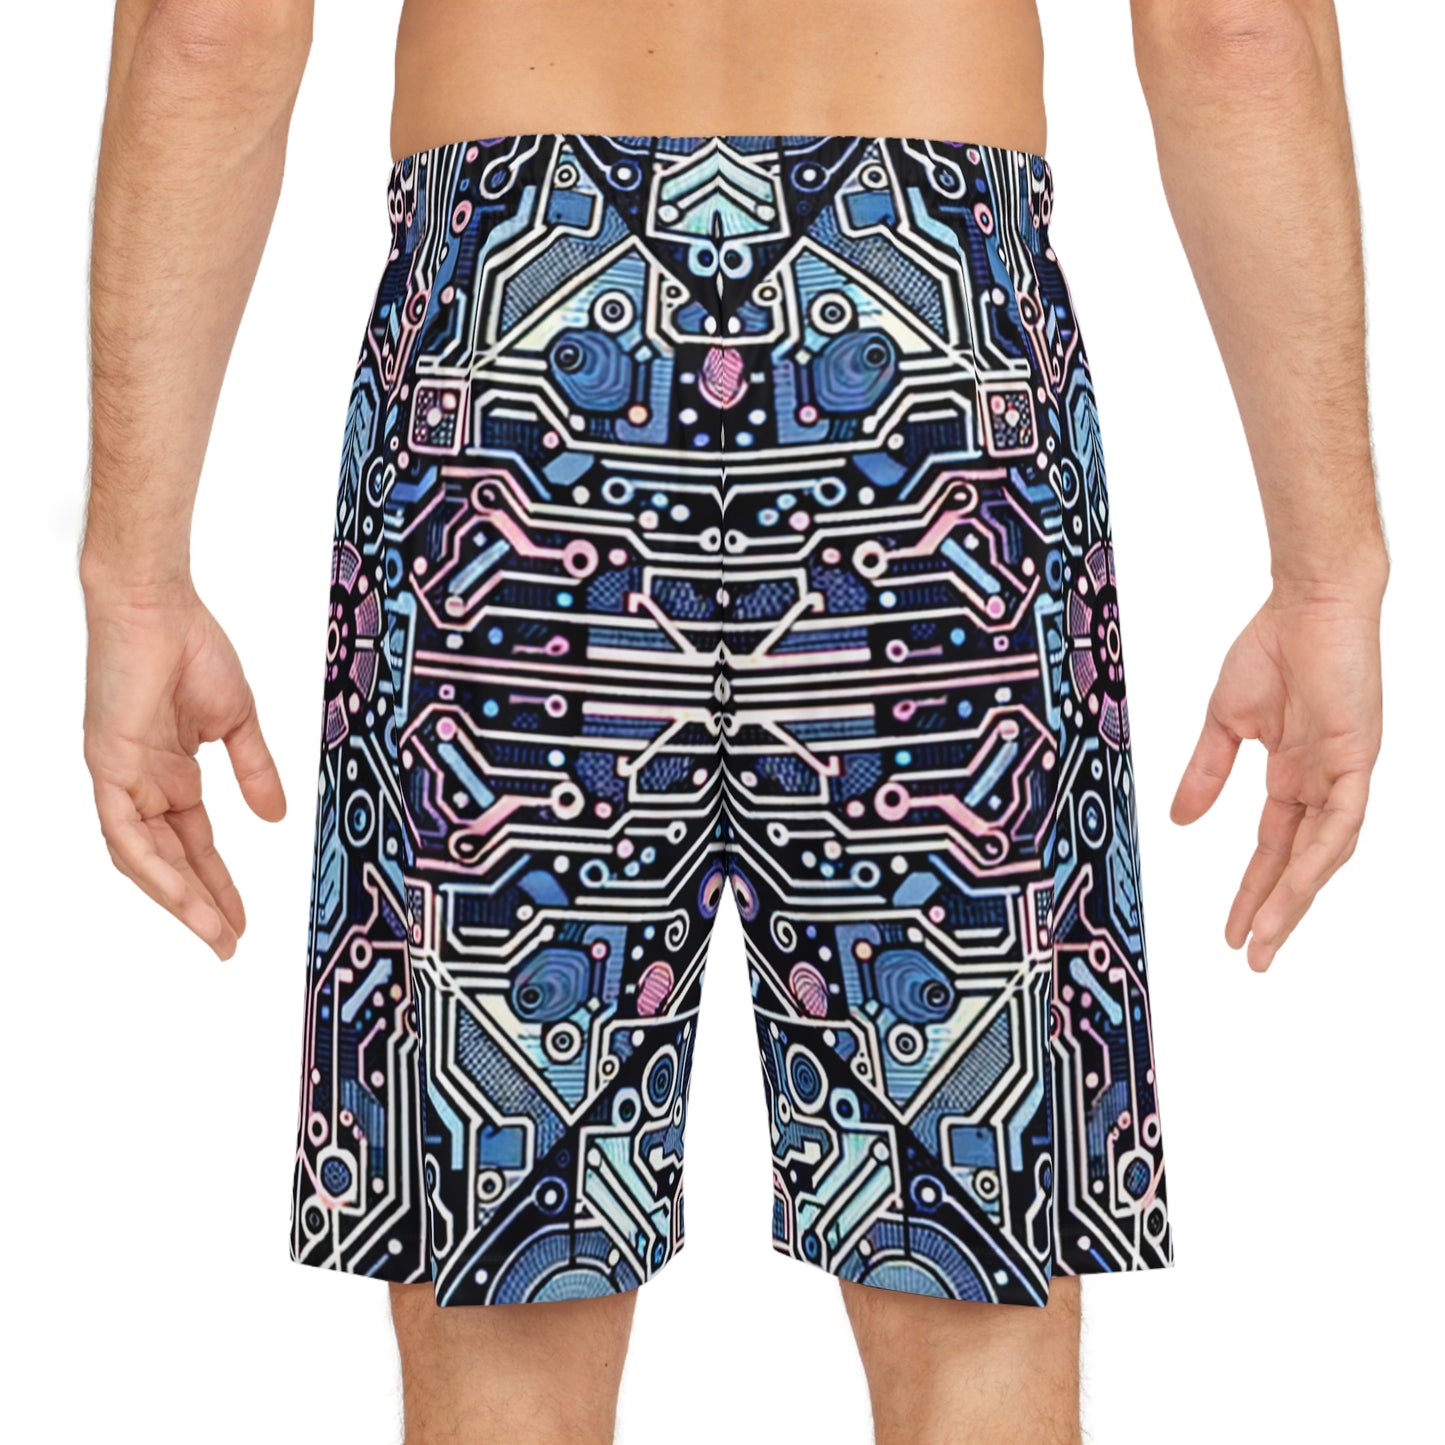 Cybernetic Mosaic Deluxe Everywhere Shorts